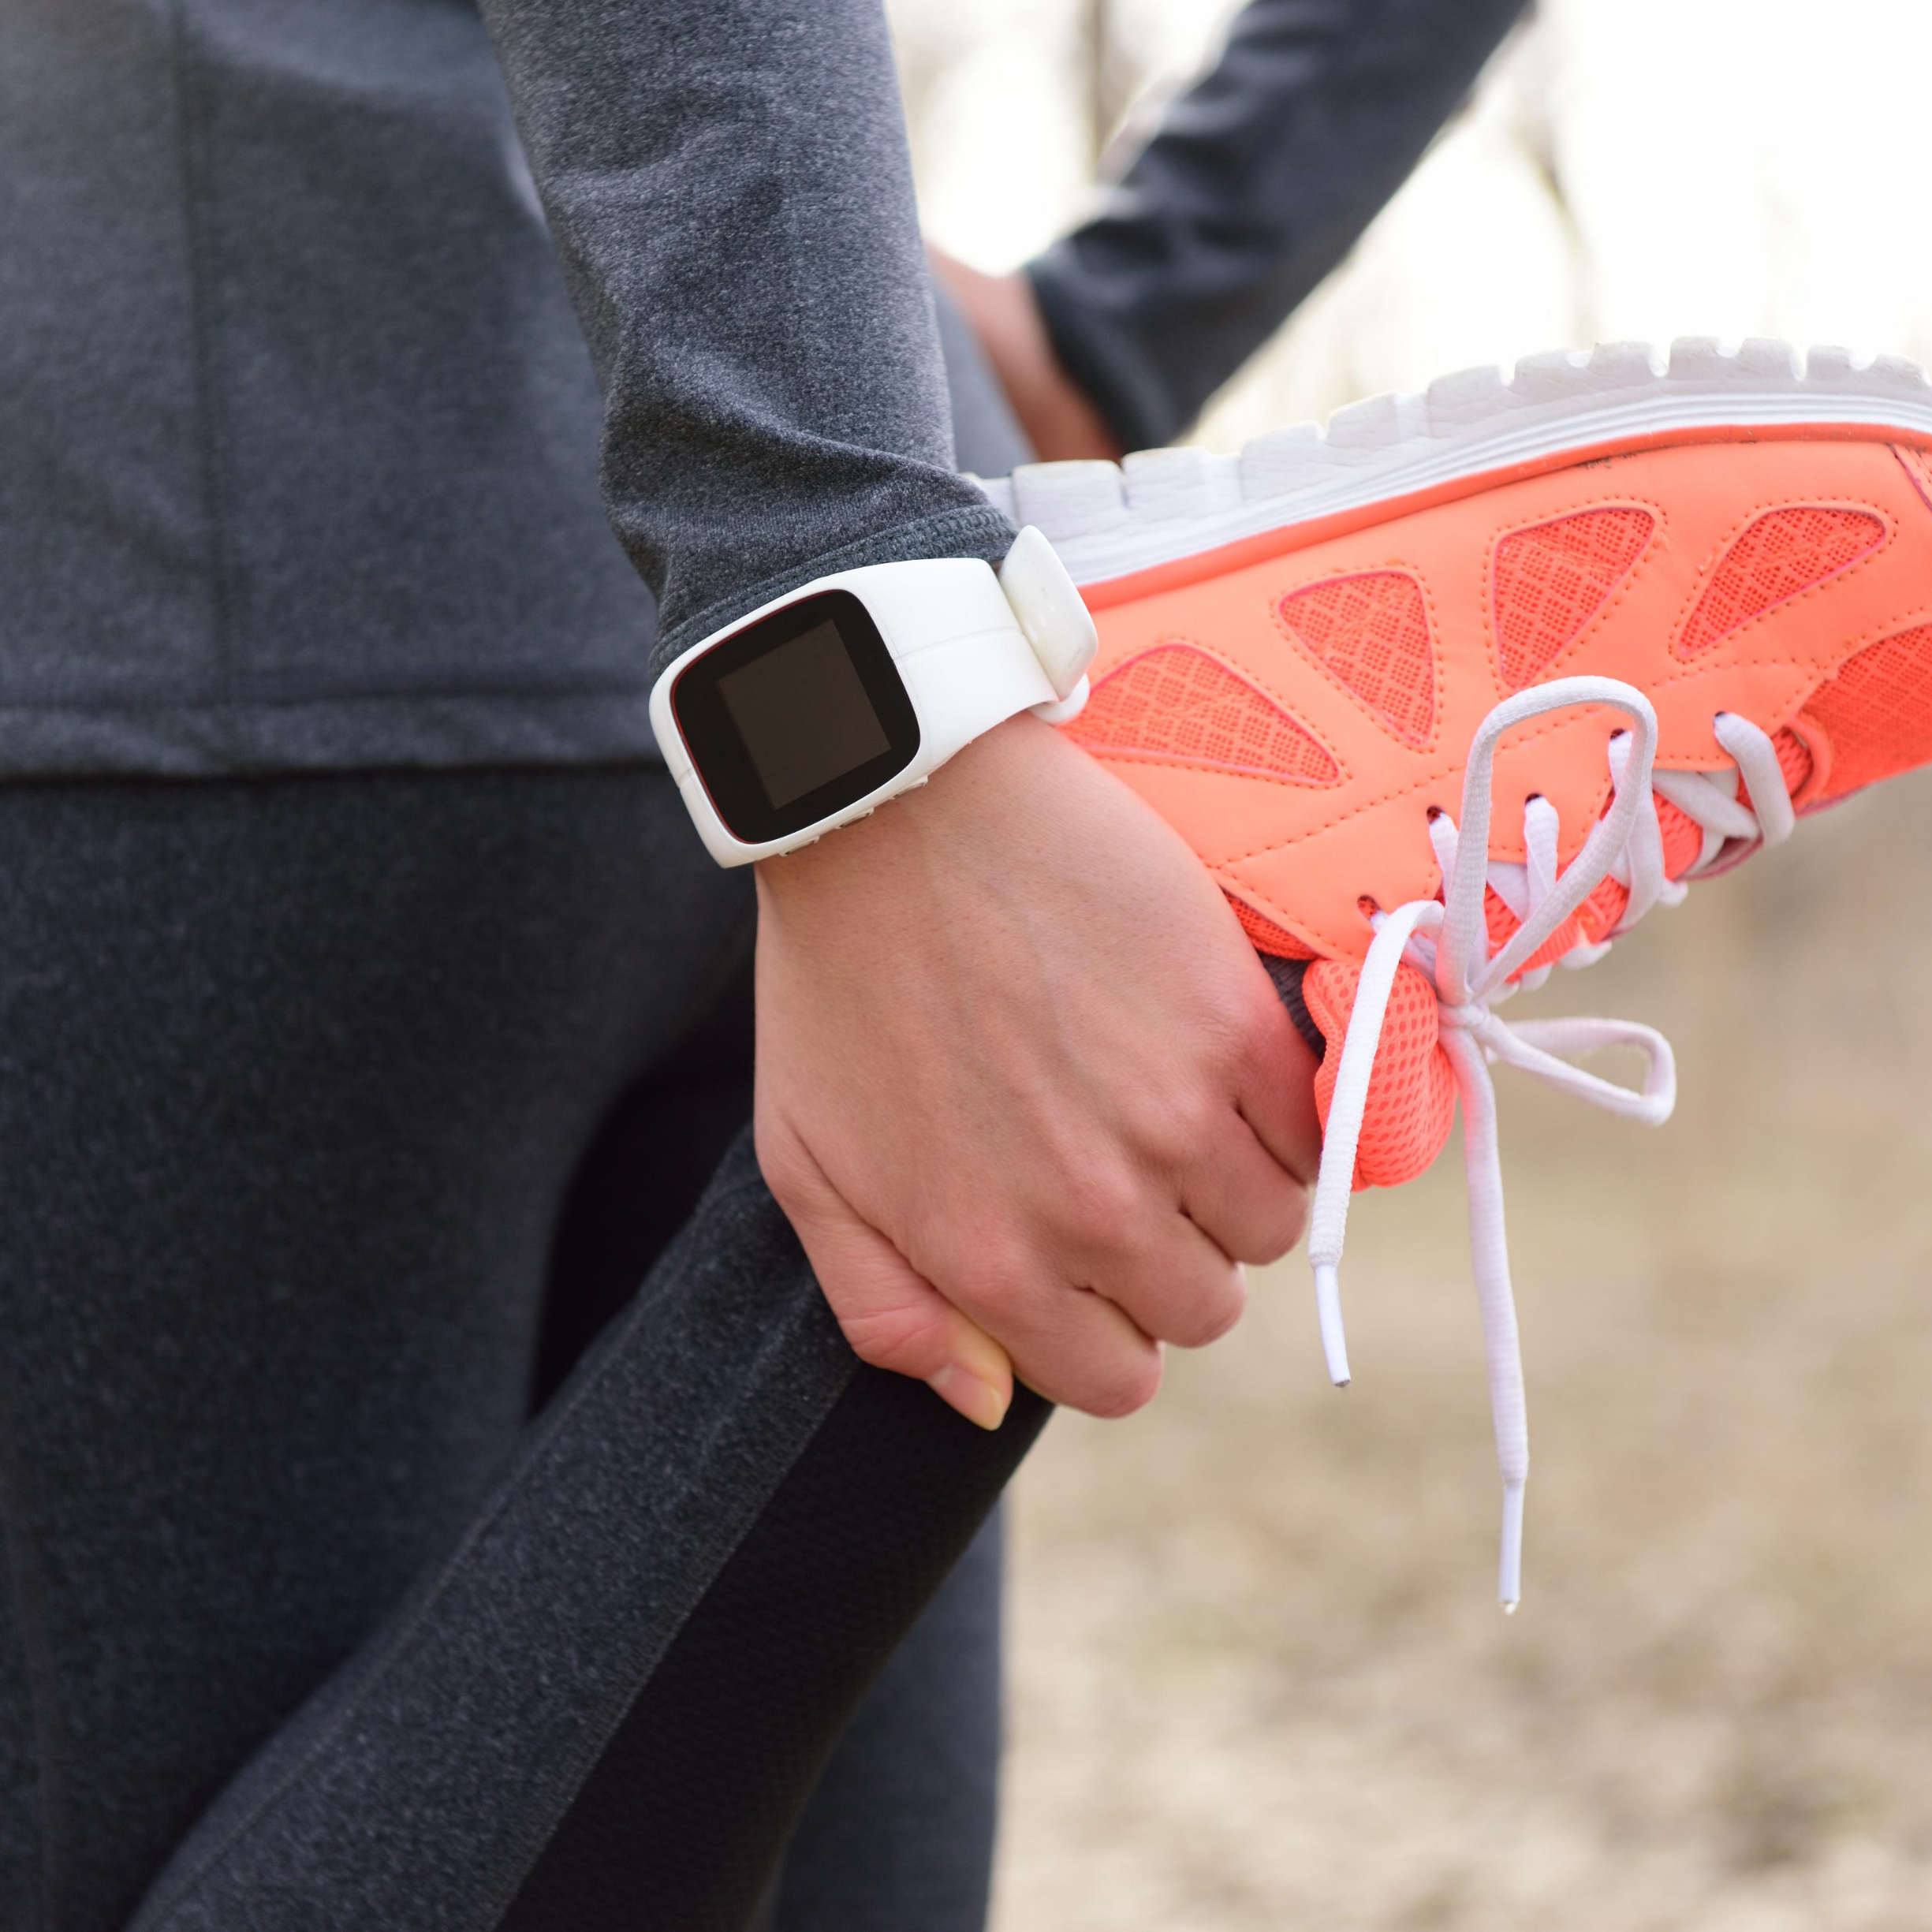 Individual Stretching front of leg with grey long sleeve top, black leggings, white watch and coral sneakers, represents “Feeling Sluggish, 30 Min Class to Jumpstart Your System” program